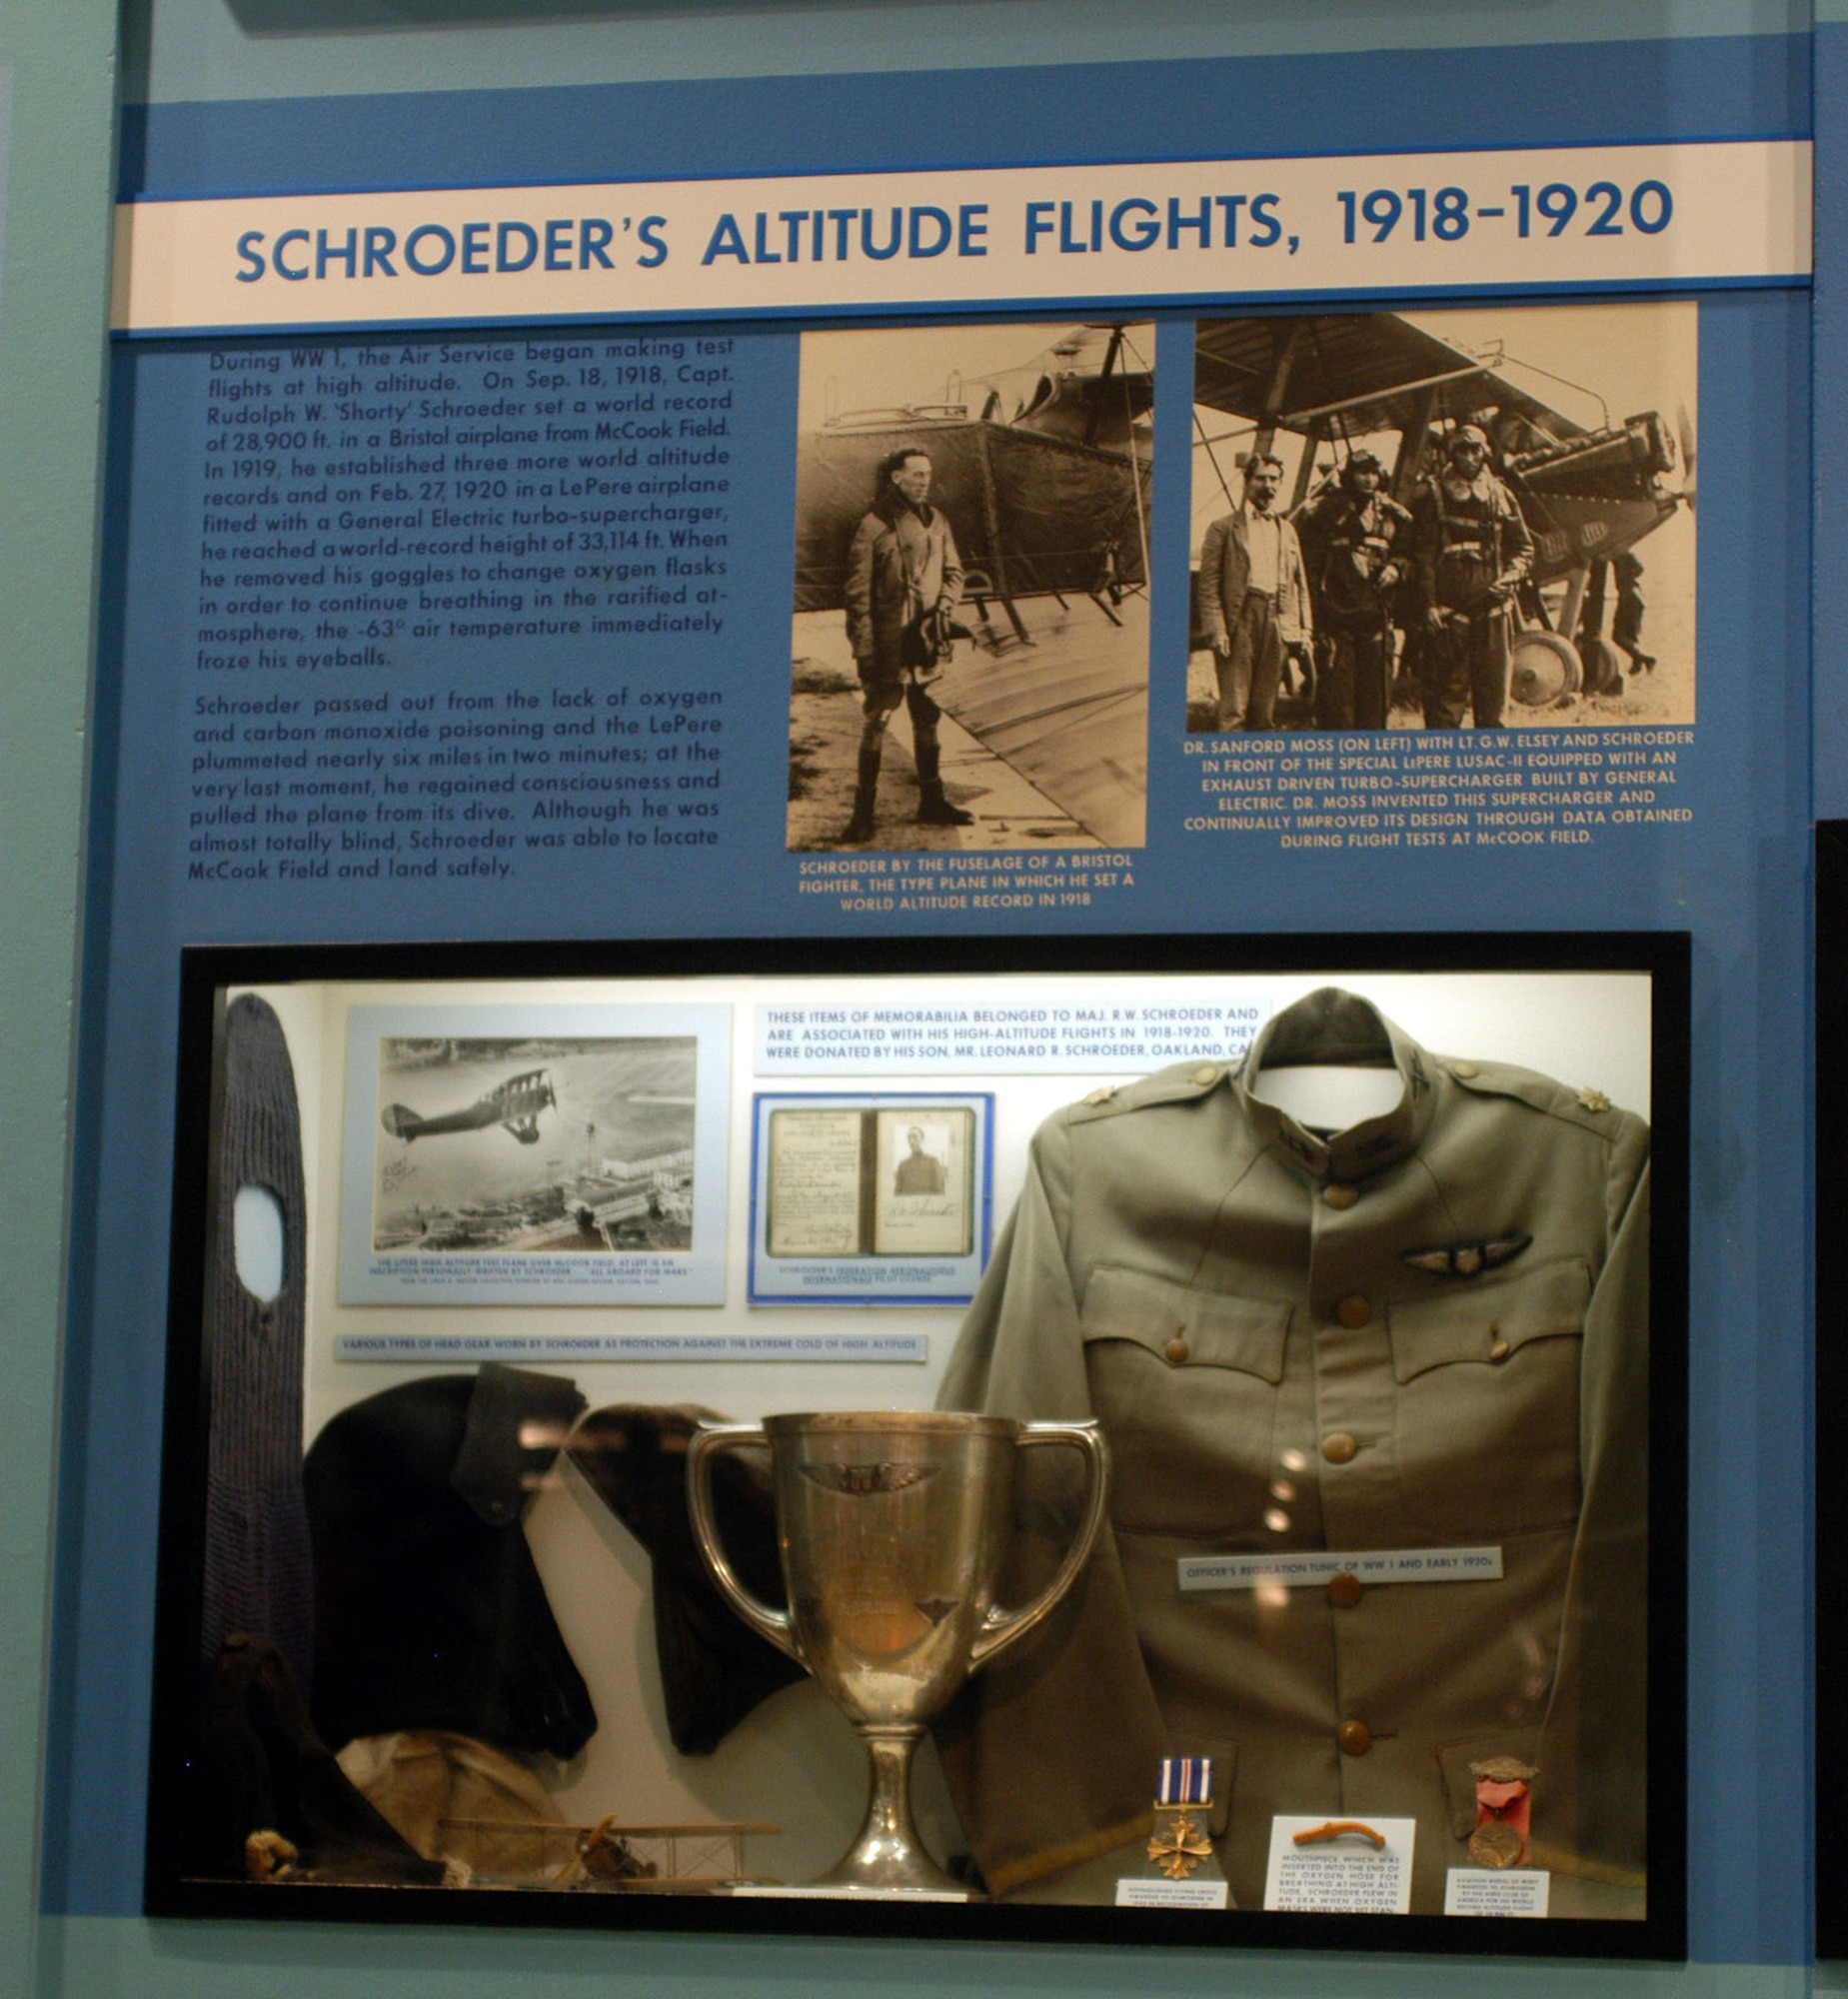 DAYTON, Ohio -- Capt. Rudolph W. "Shorty" Schroeder's Altitude Flights exhibit at the National Museum of the United States Air Force. (U.S. Air Force photo)